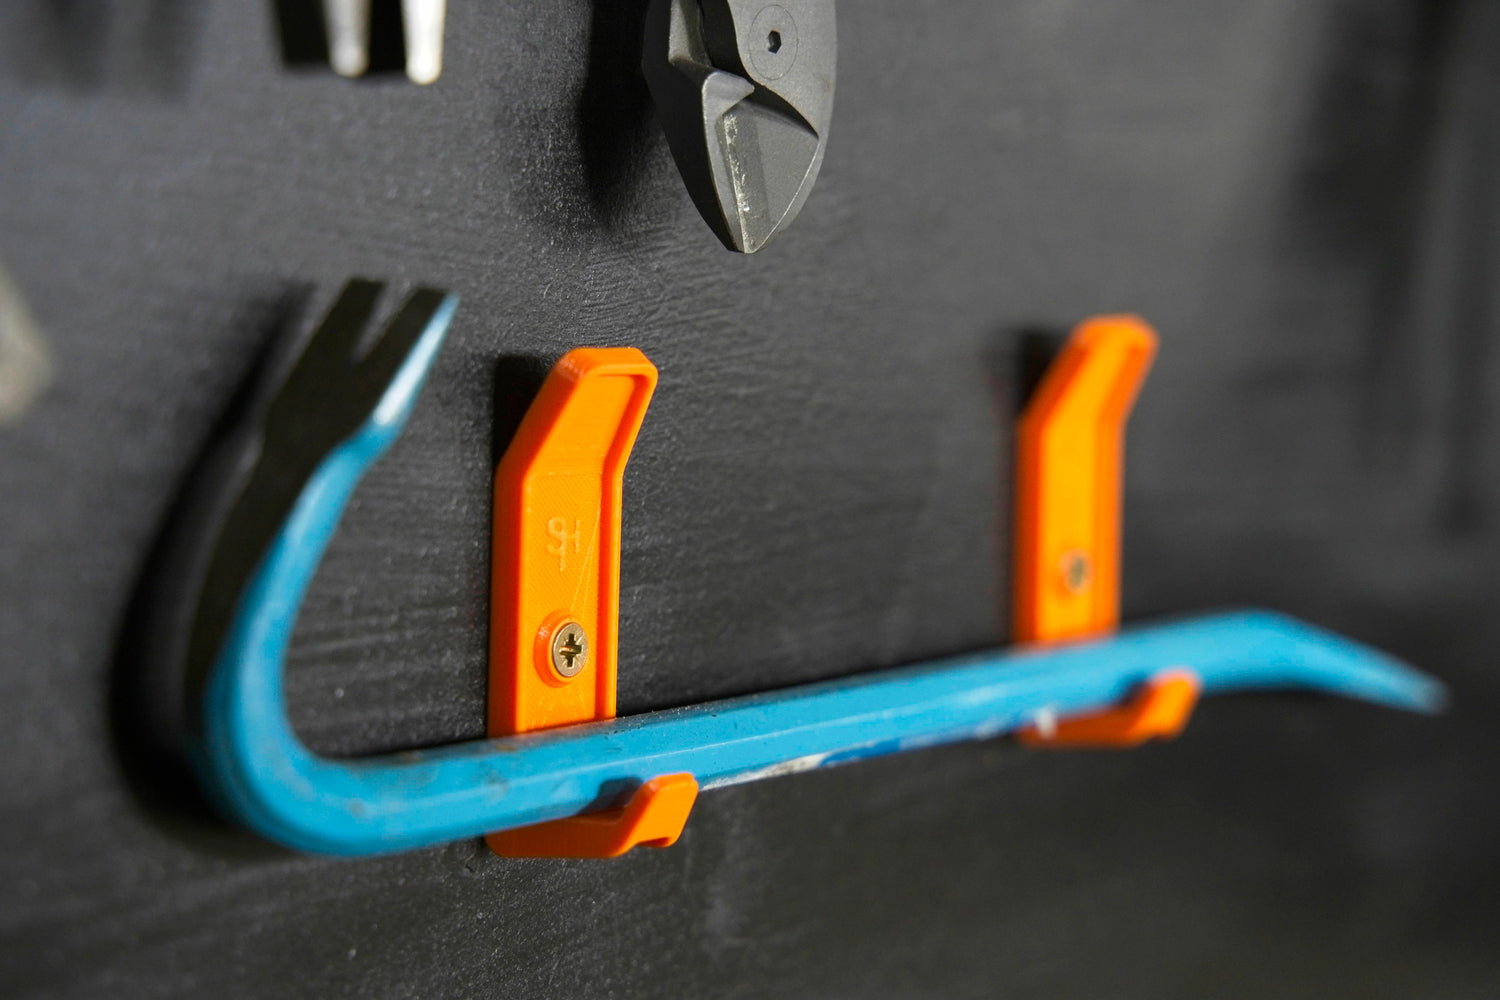 tool hooks, crowbar hooks, clever hooks that hold almost anything, Superhooks